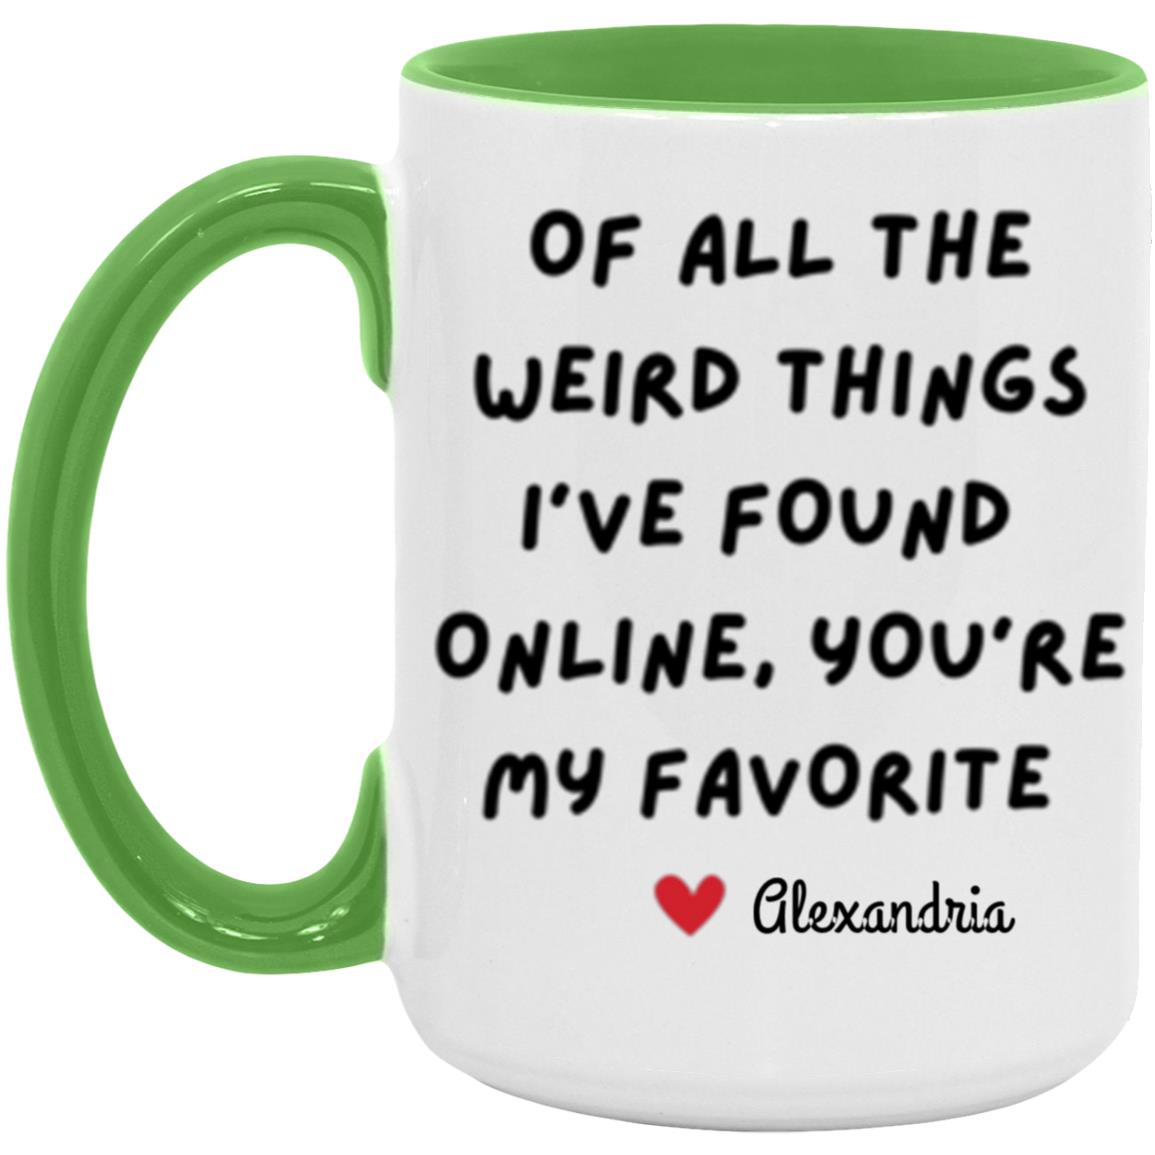 Get trendy with of all the weird things I've found online 15 oz "Of all the Weird Things I've Found online, You're my Favorite" Mug - Apparel available at Good Gift Company. Grab yours for $15.80 today!